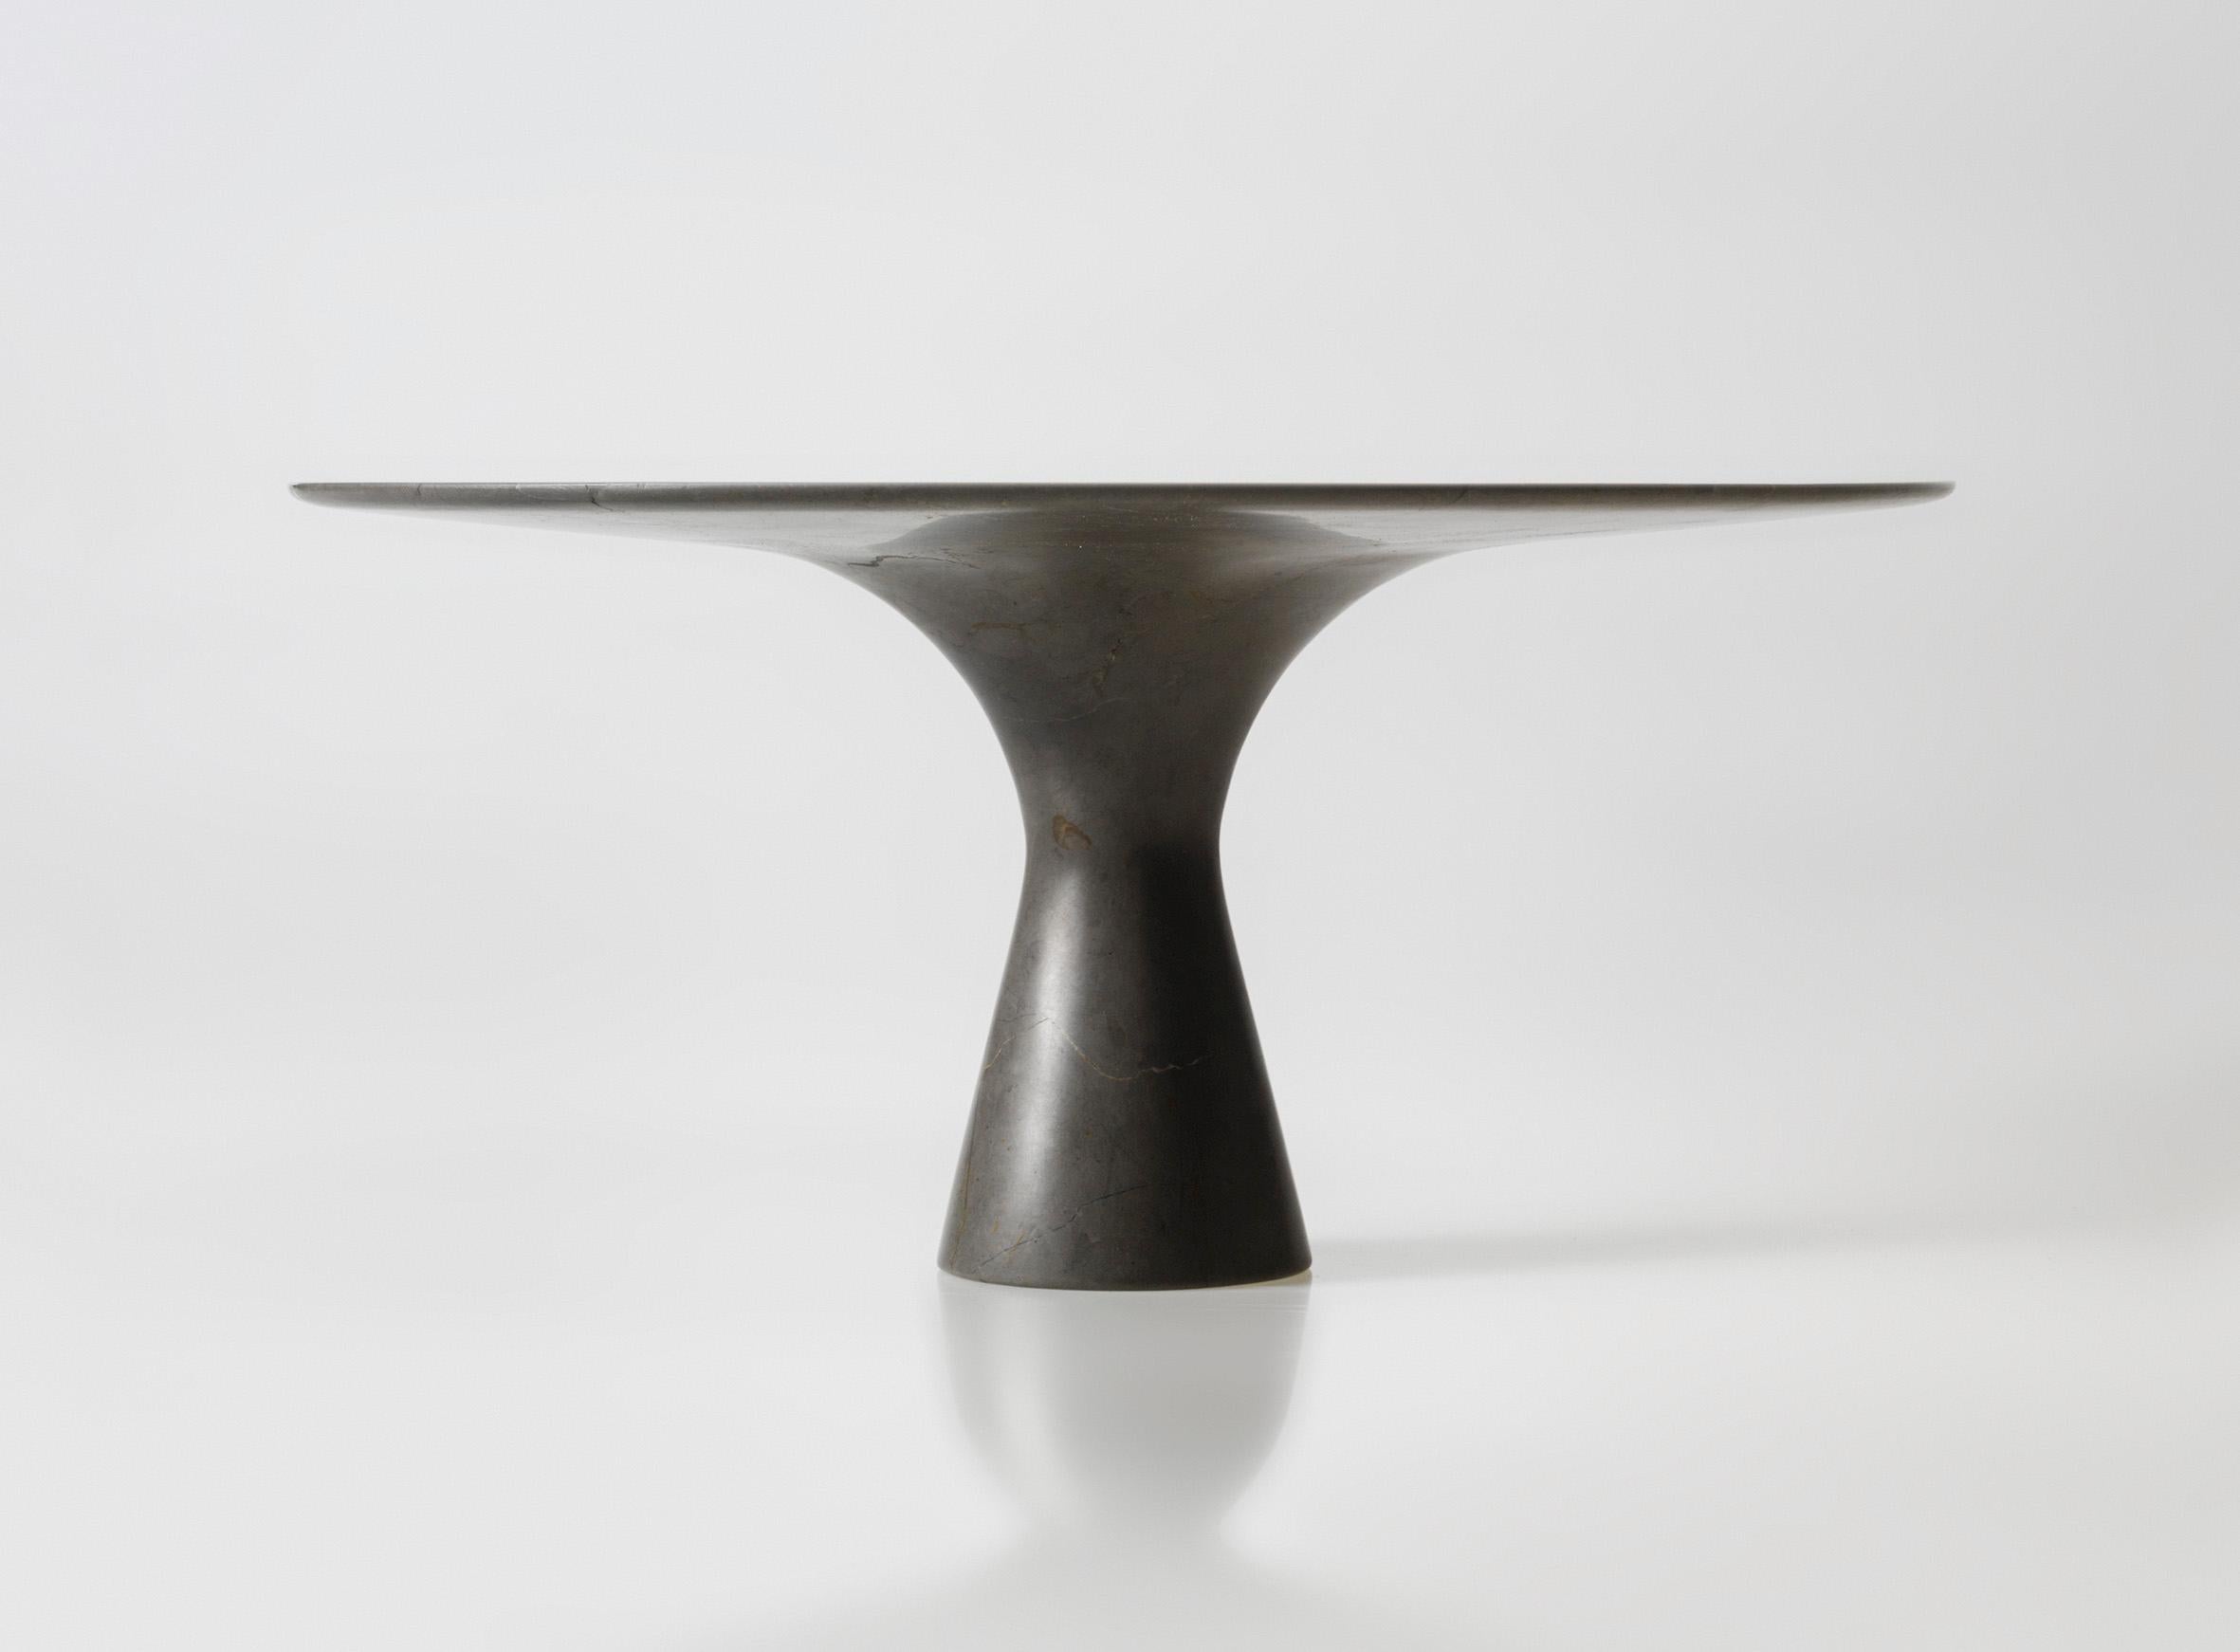 Grafite refined contemporary marble dining table 250/75
Dimensions: 250 x 160 x 75 cm
Materials: Grafite.

Angelo is the essence of a round table in natural stone, a sculptural shape in robust material with elegant lines and refined finishes.

The